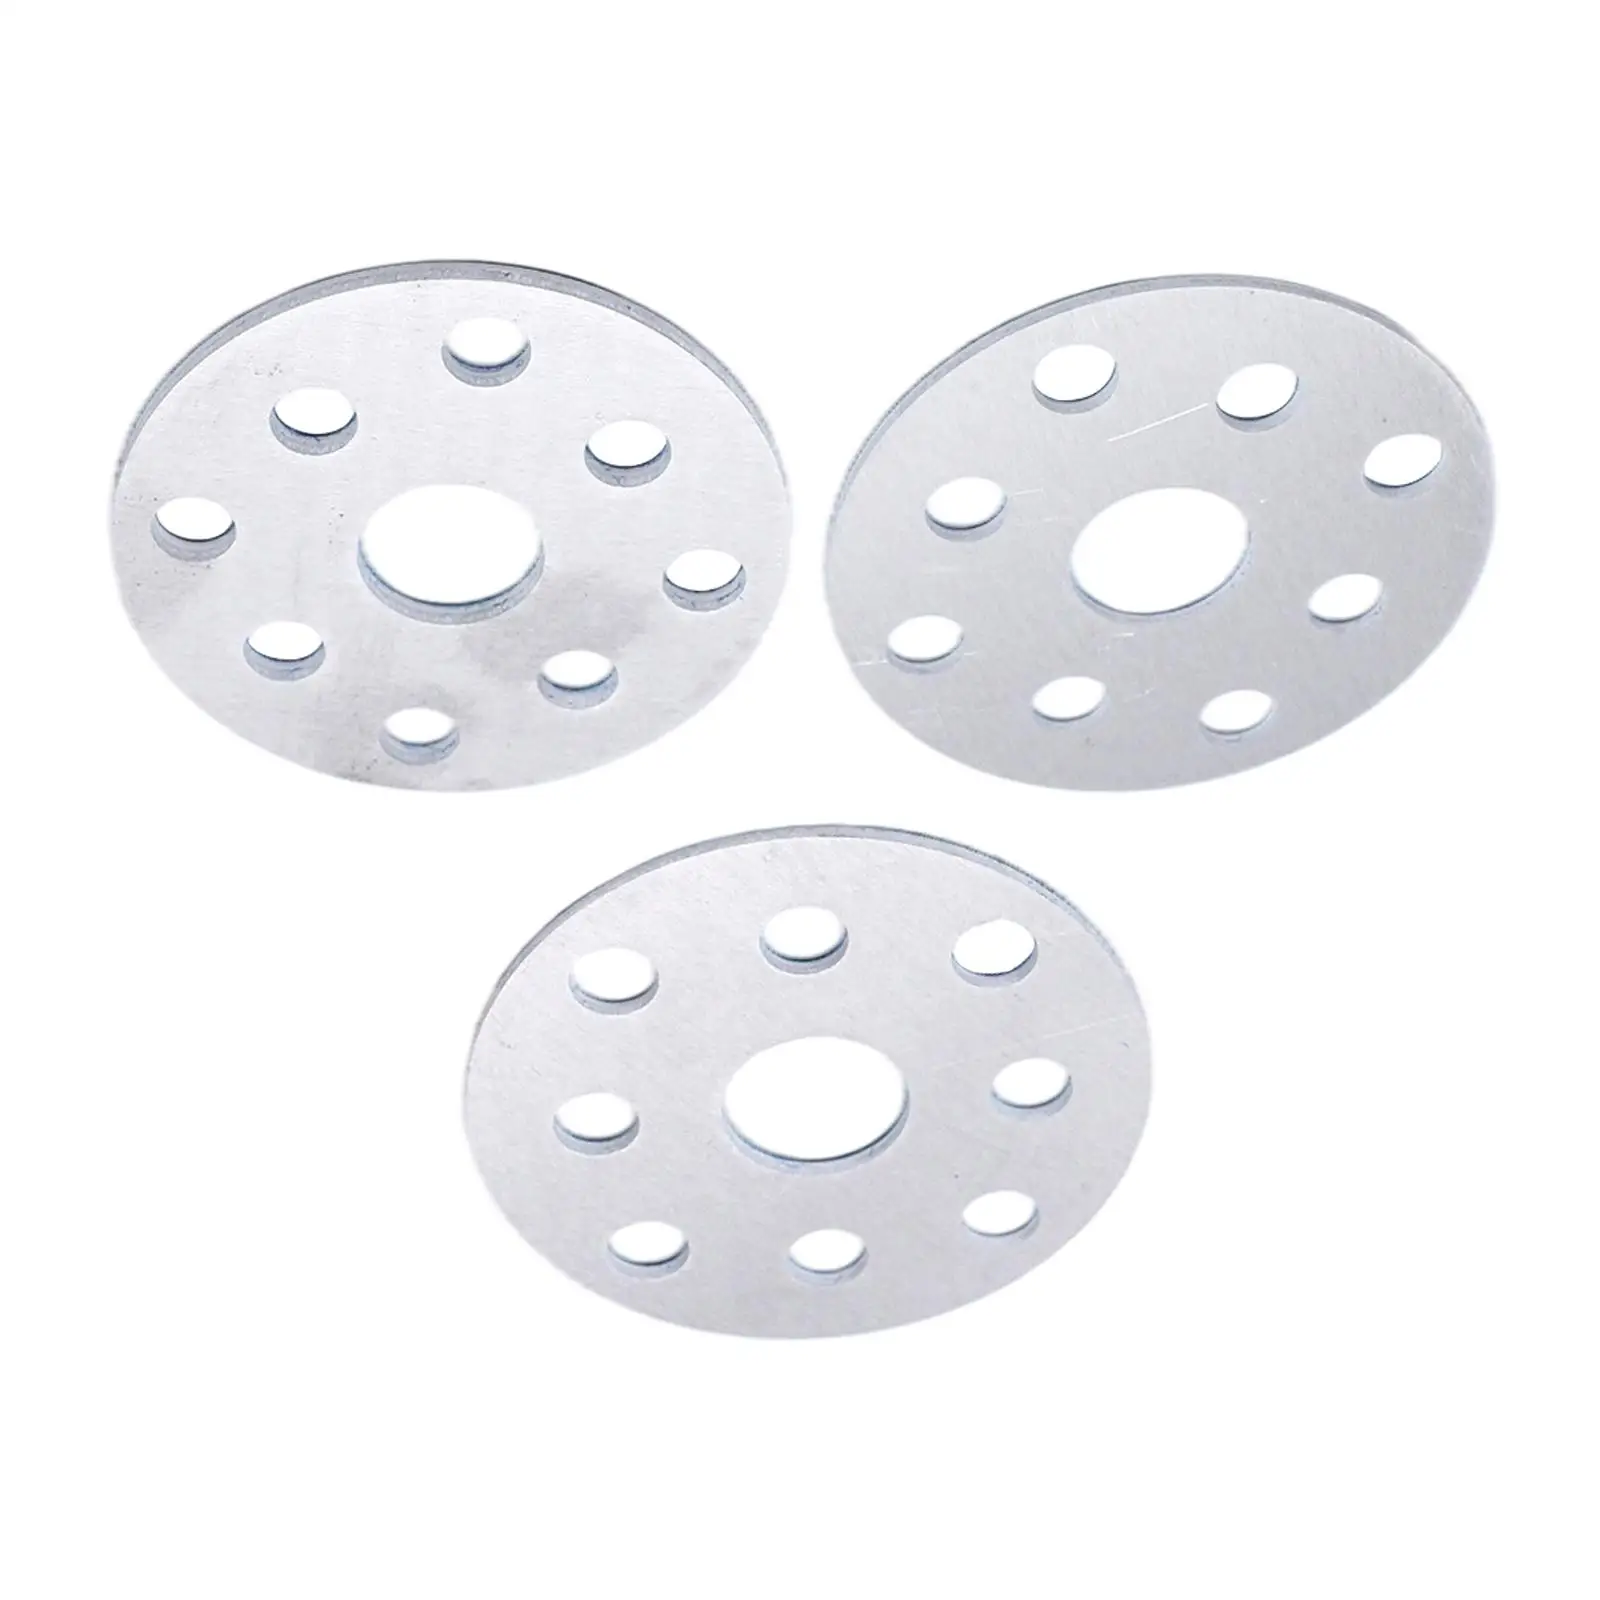 

3Pcs Water Pump Spacer Silver Metal Auto Parts Pulley Shim Kit Replacement for Ford 302 350 427 454 Pulley Fan Accessories